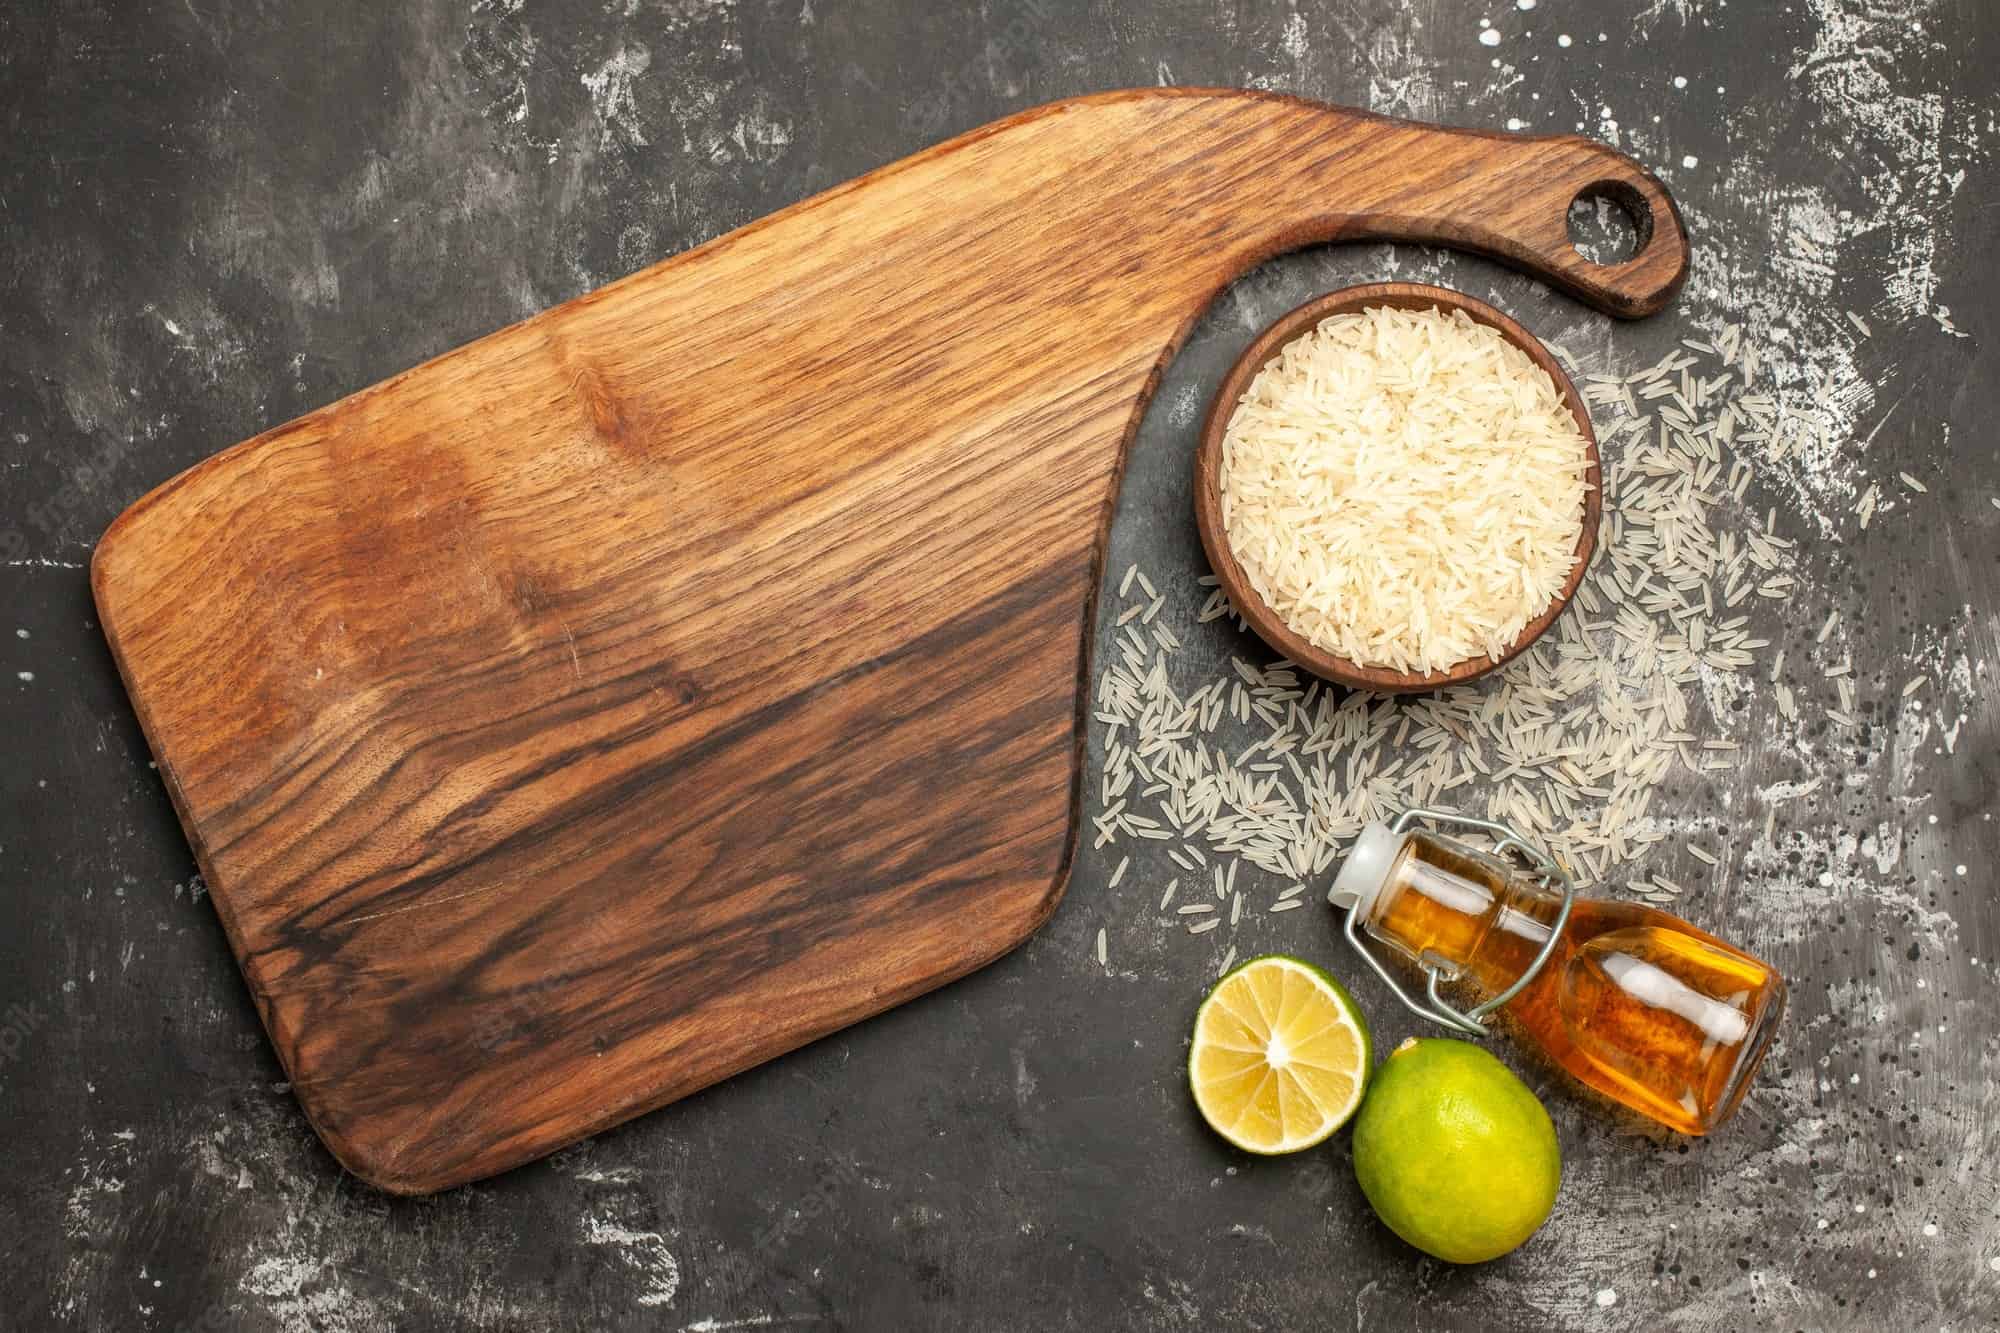 Bamboo Vs. Wood Cutting Board [9 Differences Explained]